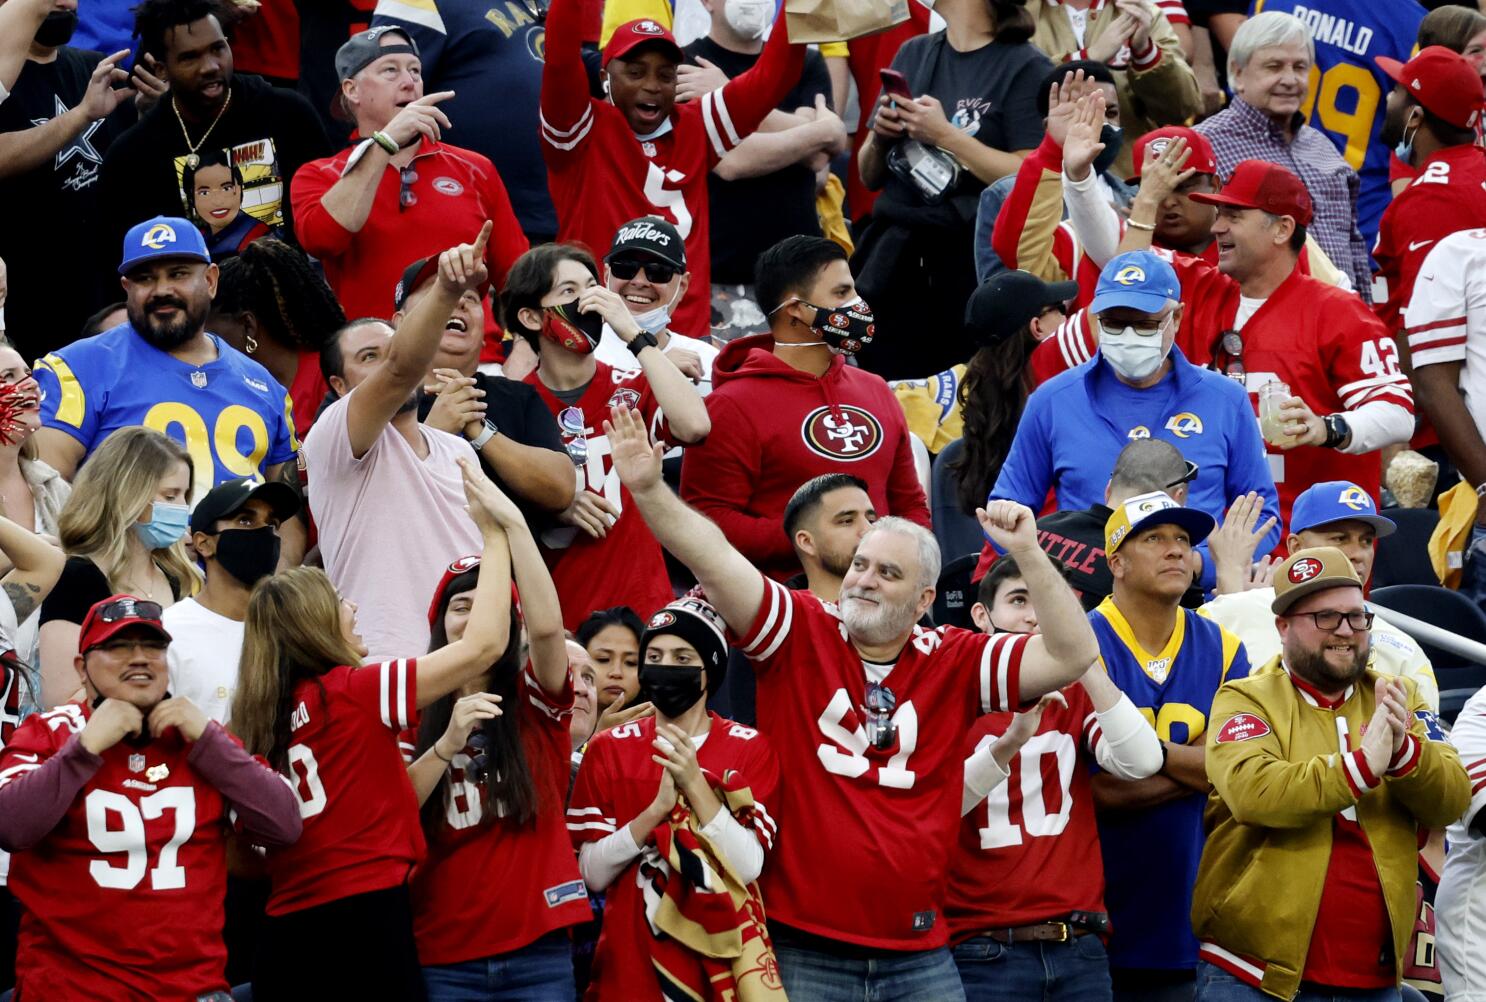 Don't blame Rams for 49ers fans flooding SoFi Stadium - Los Angeles Times